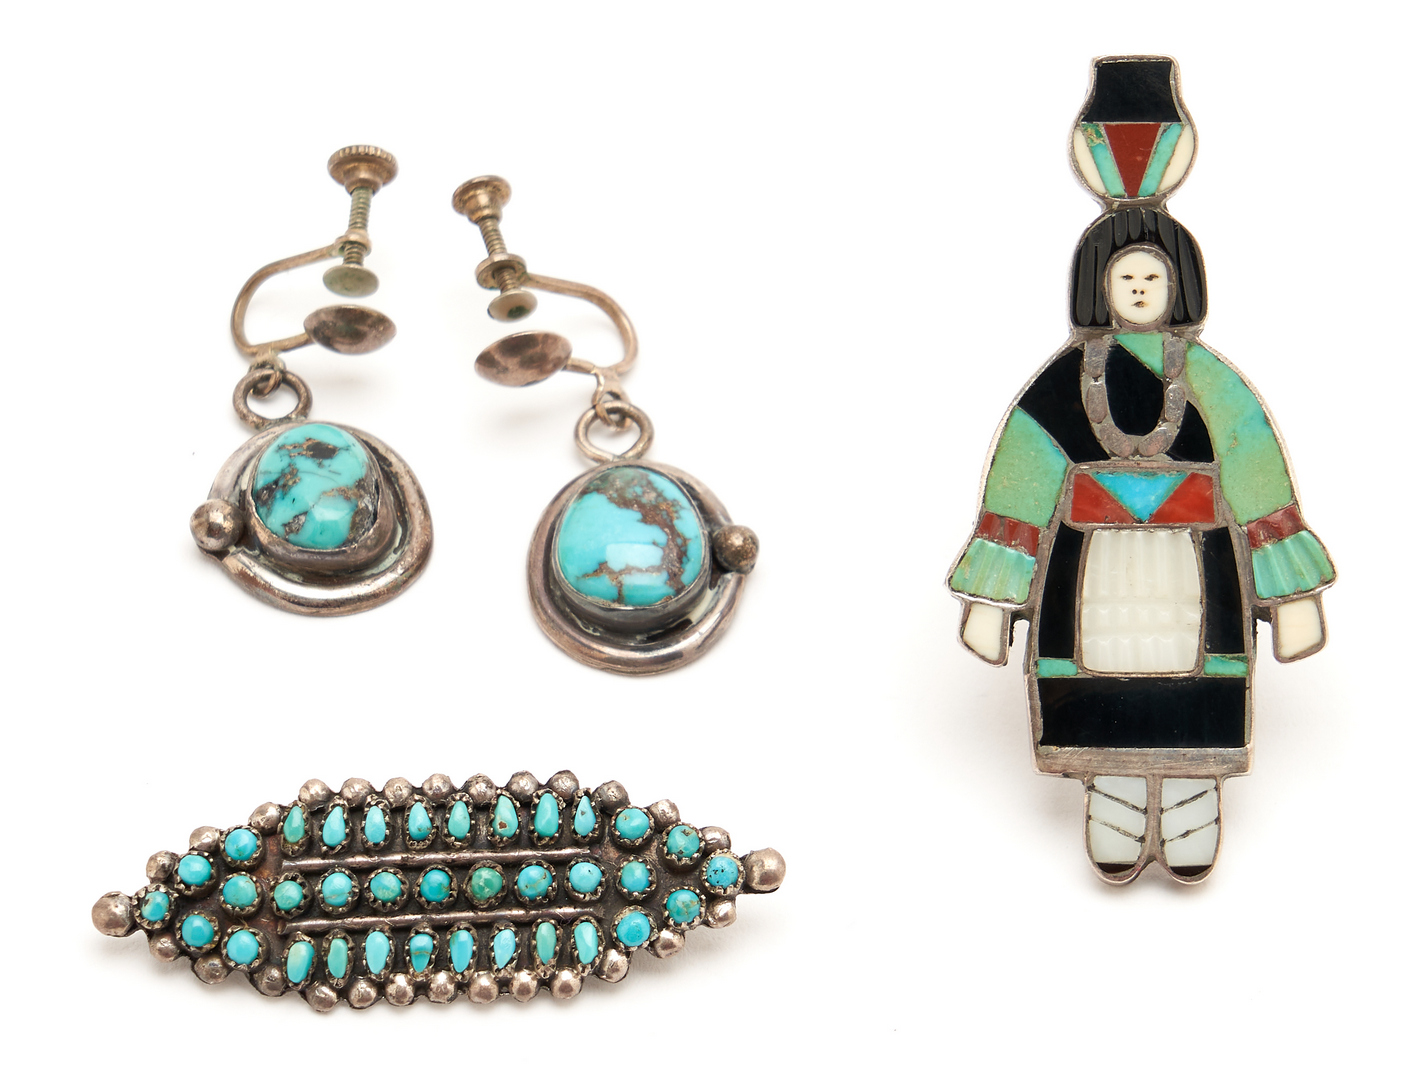 Lot 1096: 9 Native American Silver, Turquoise & Clay Jewelry Items